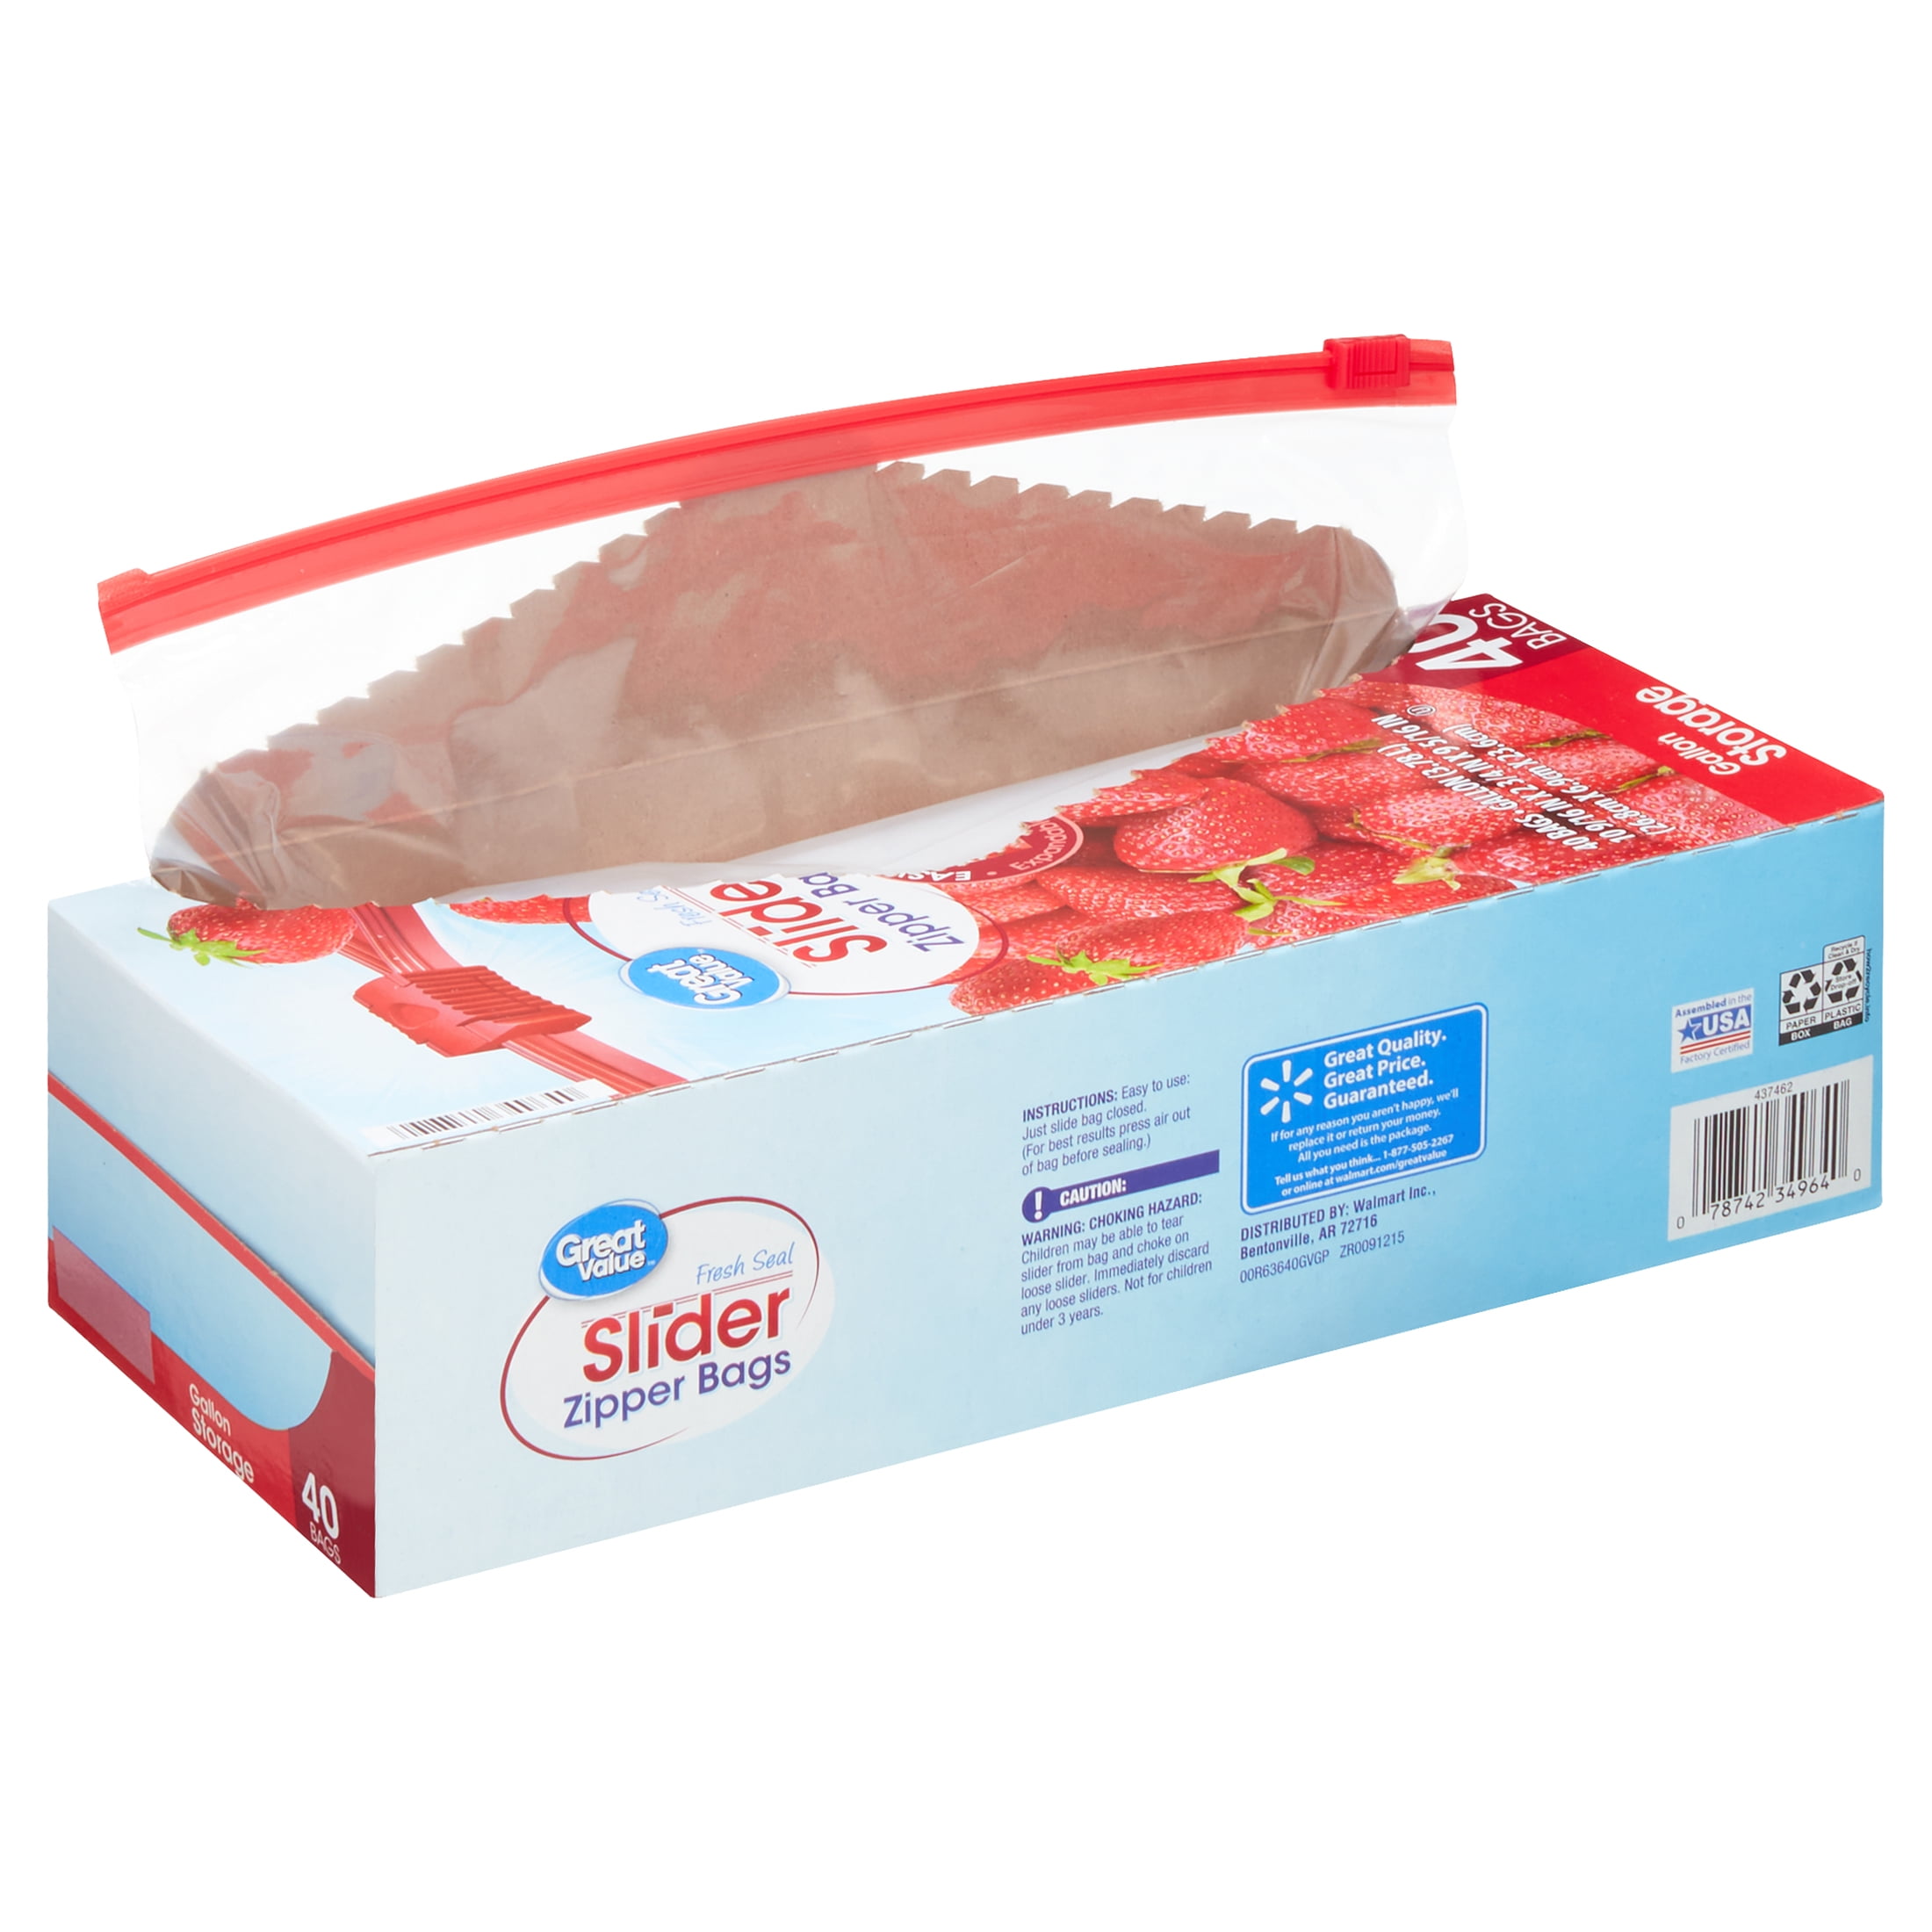 Great Value Half Gallon Slider Bags, 40 Count 